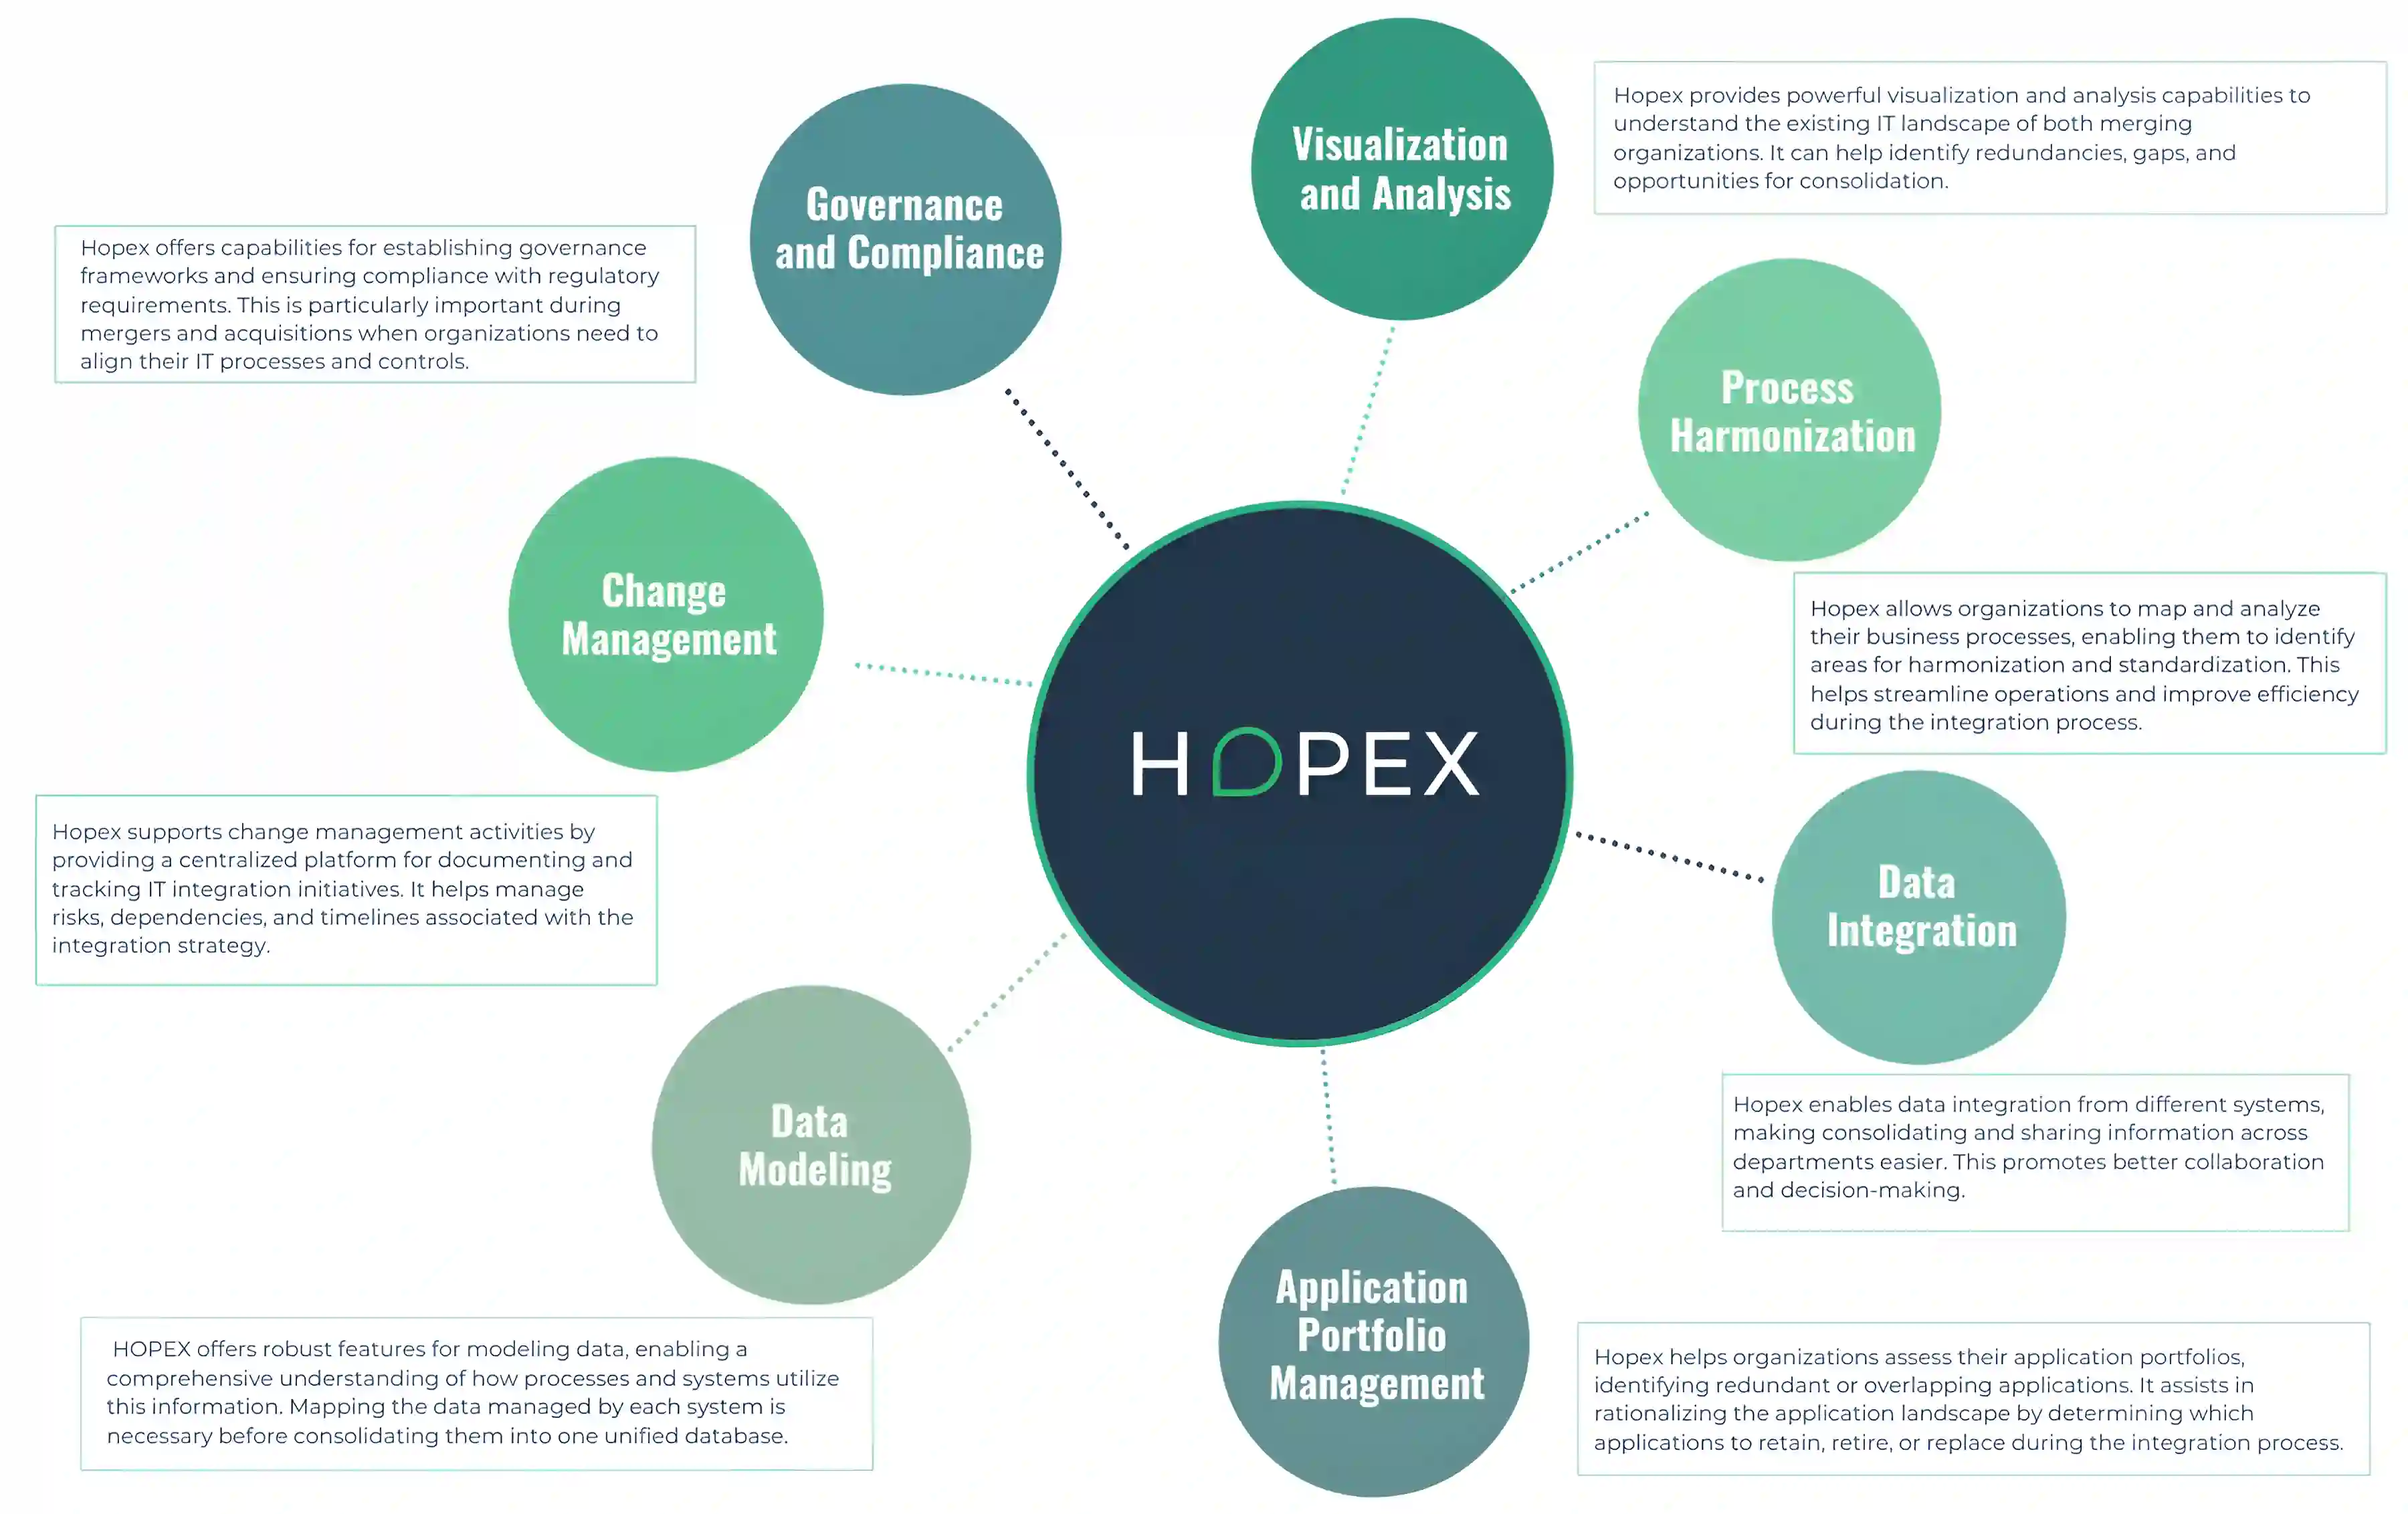 How Hopex can help with IT Integration Strategy for Mergers and Acquisitions